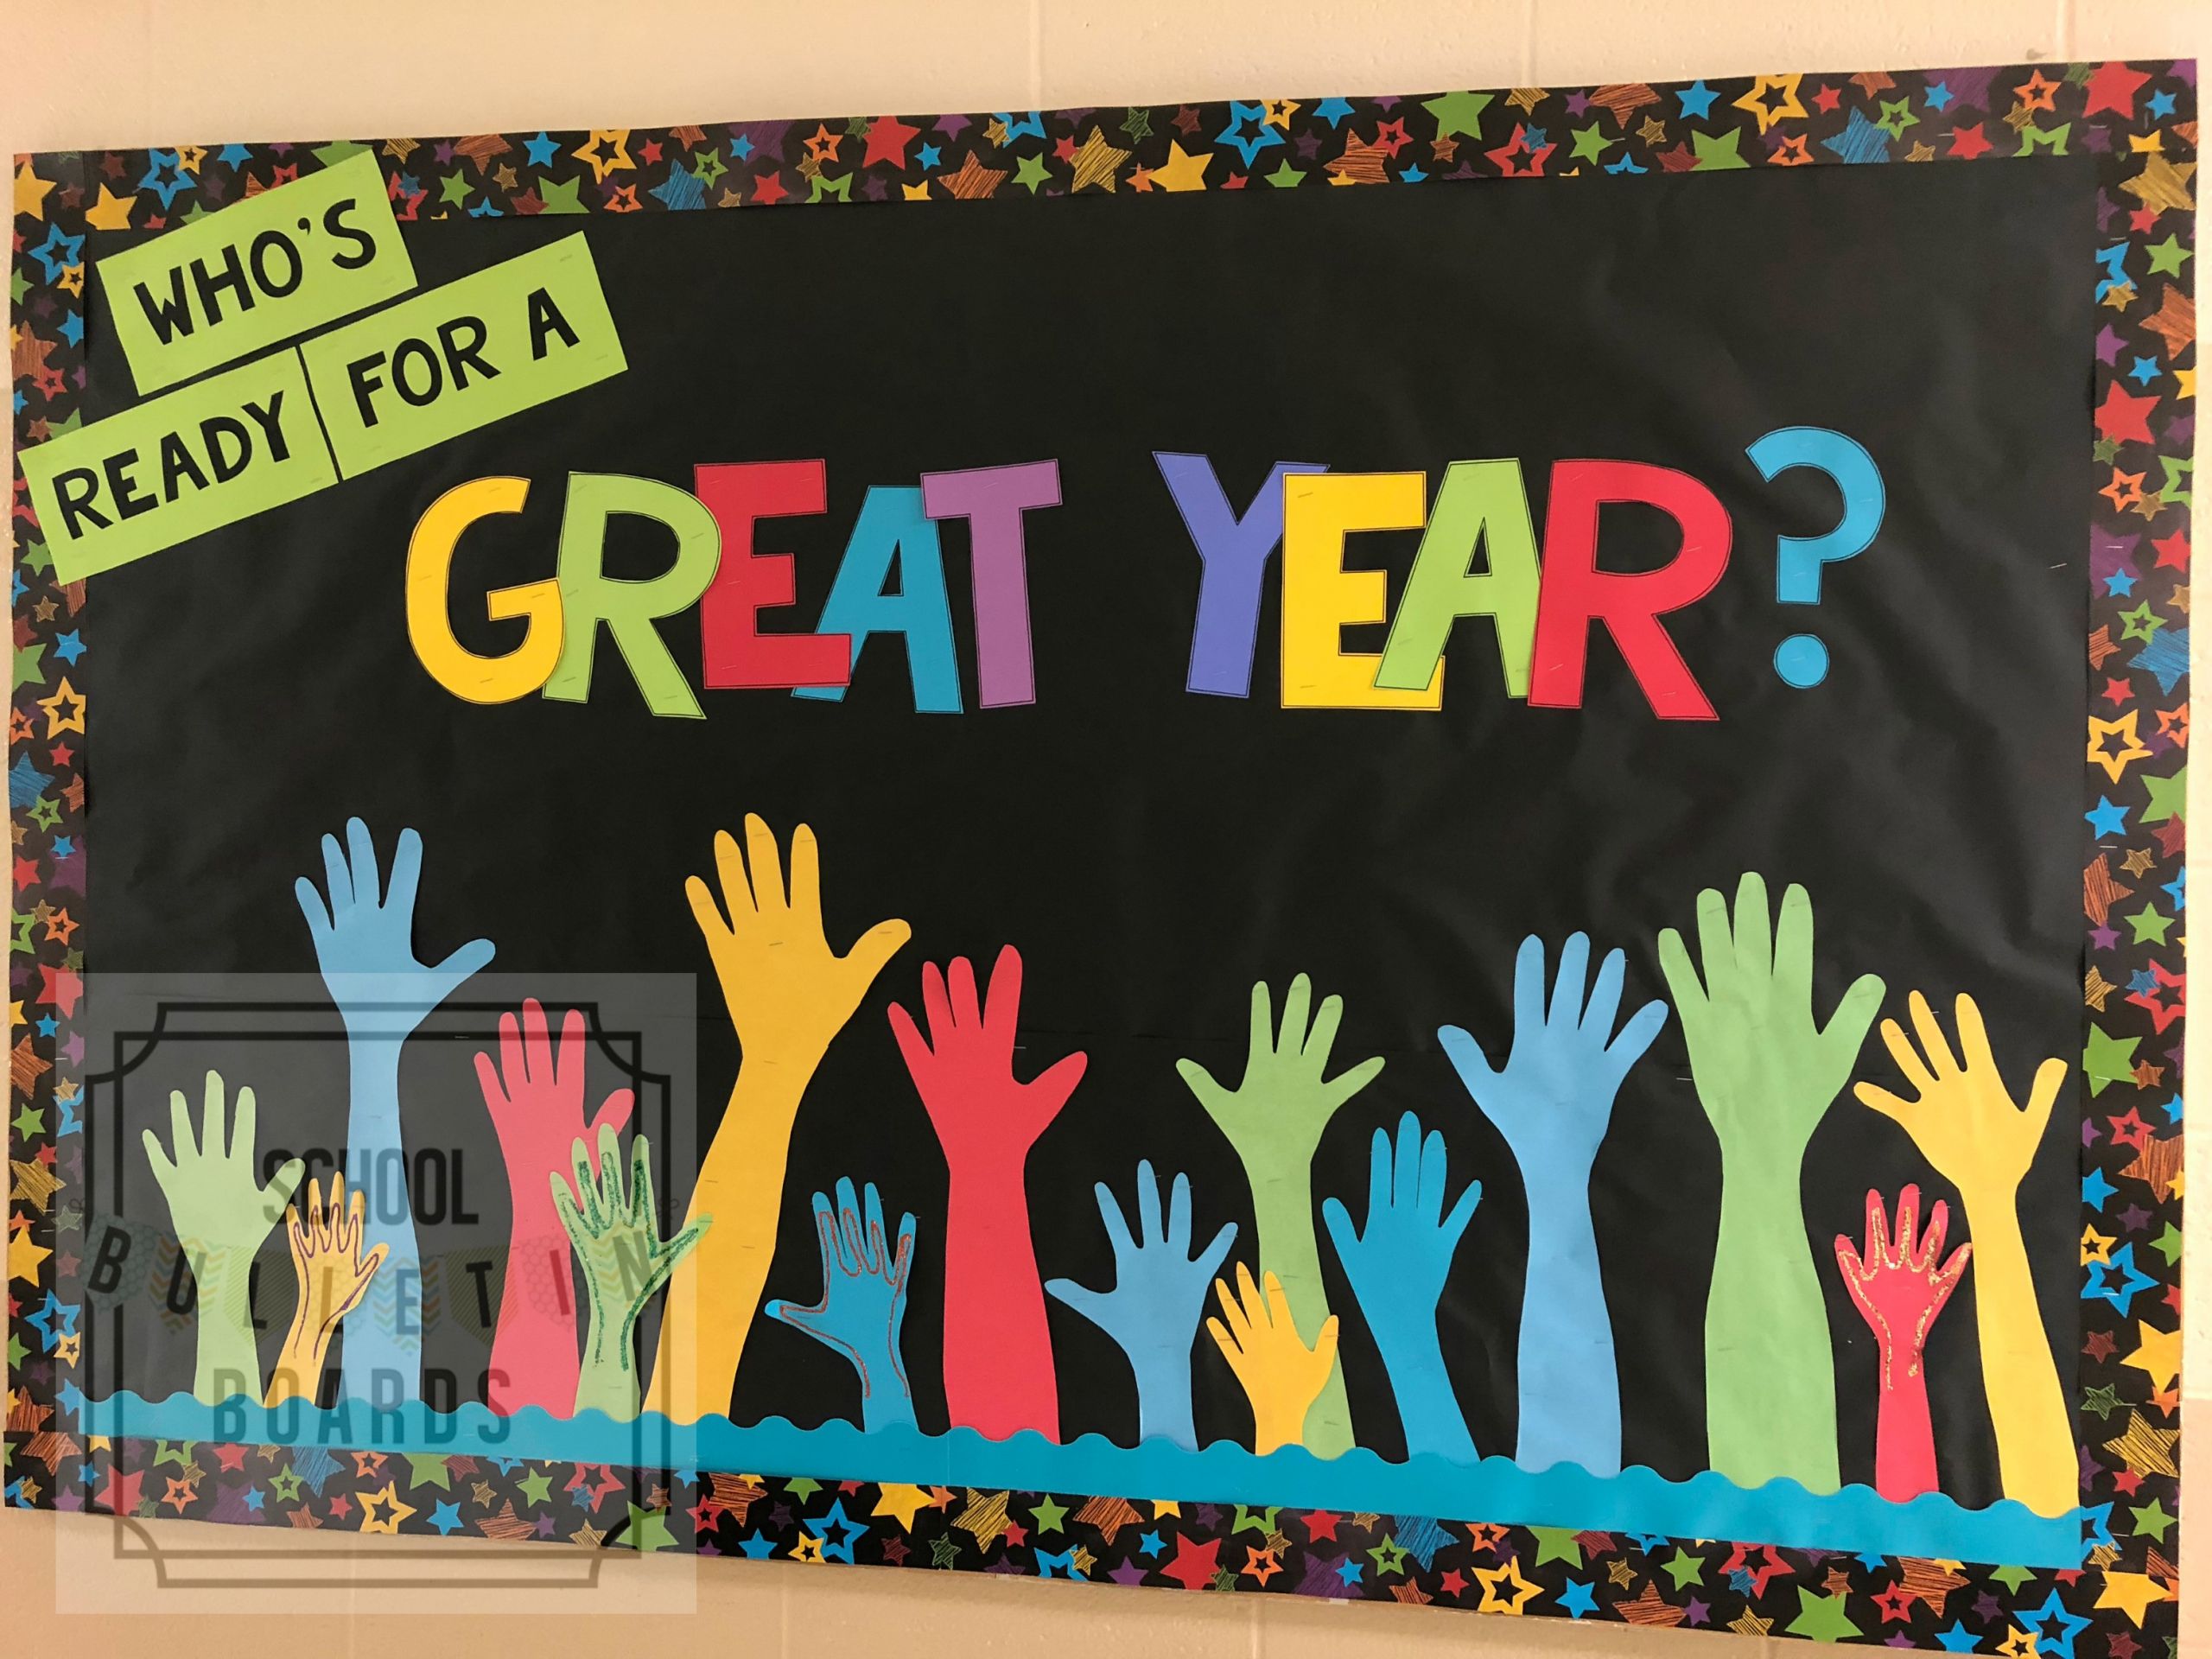 New School Year Bulletin Board Ideas
 Who Is Ready for a Great Year